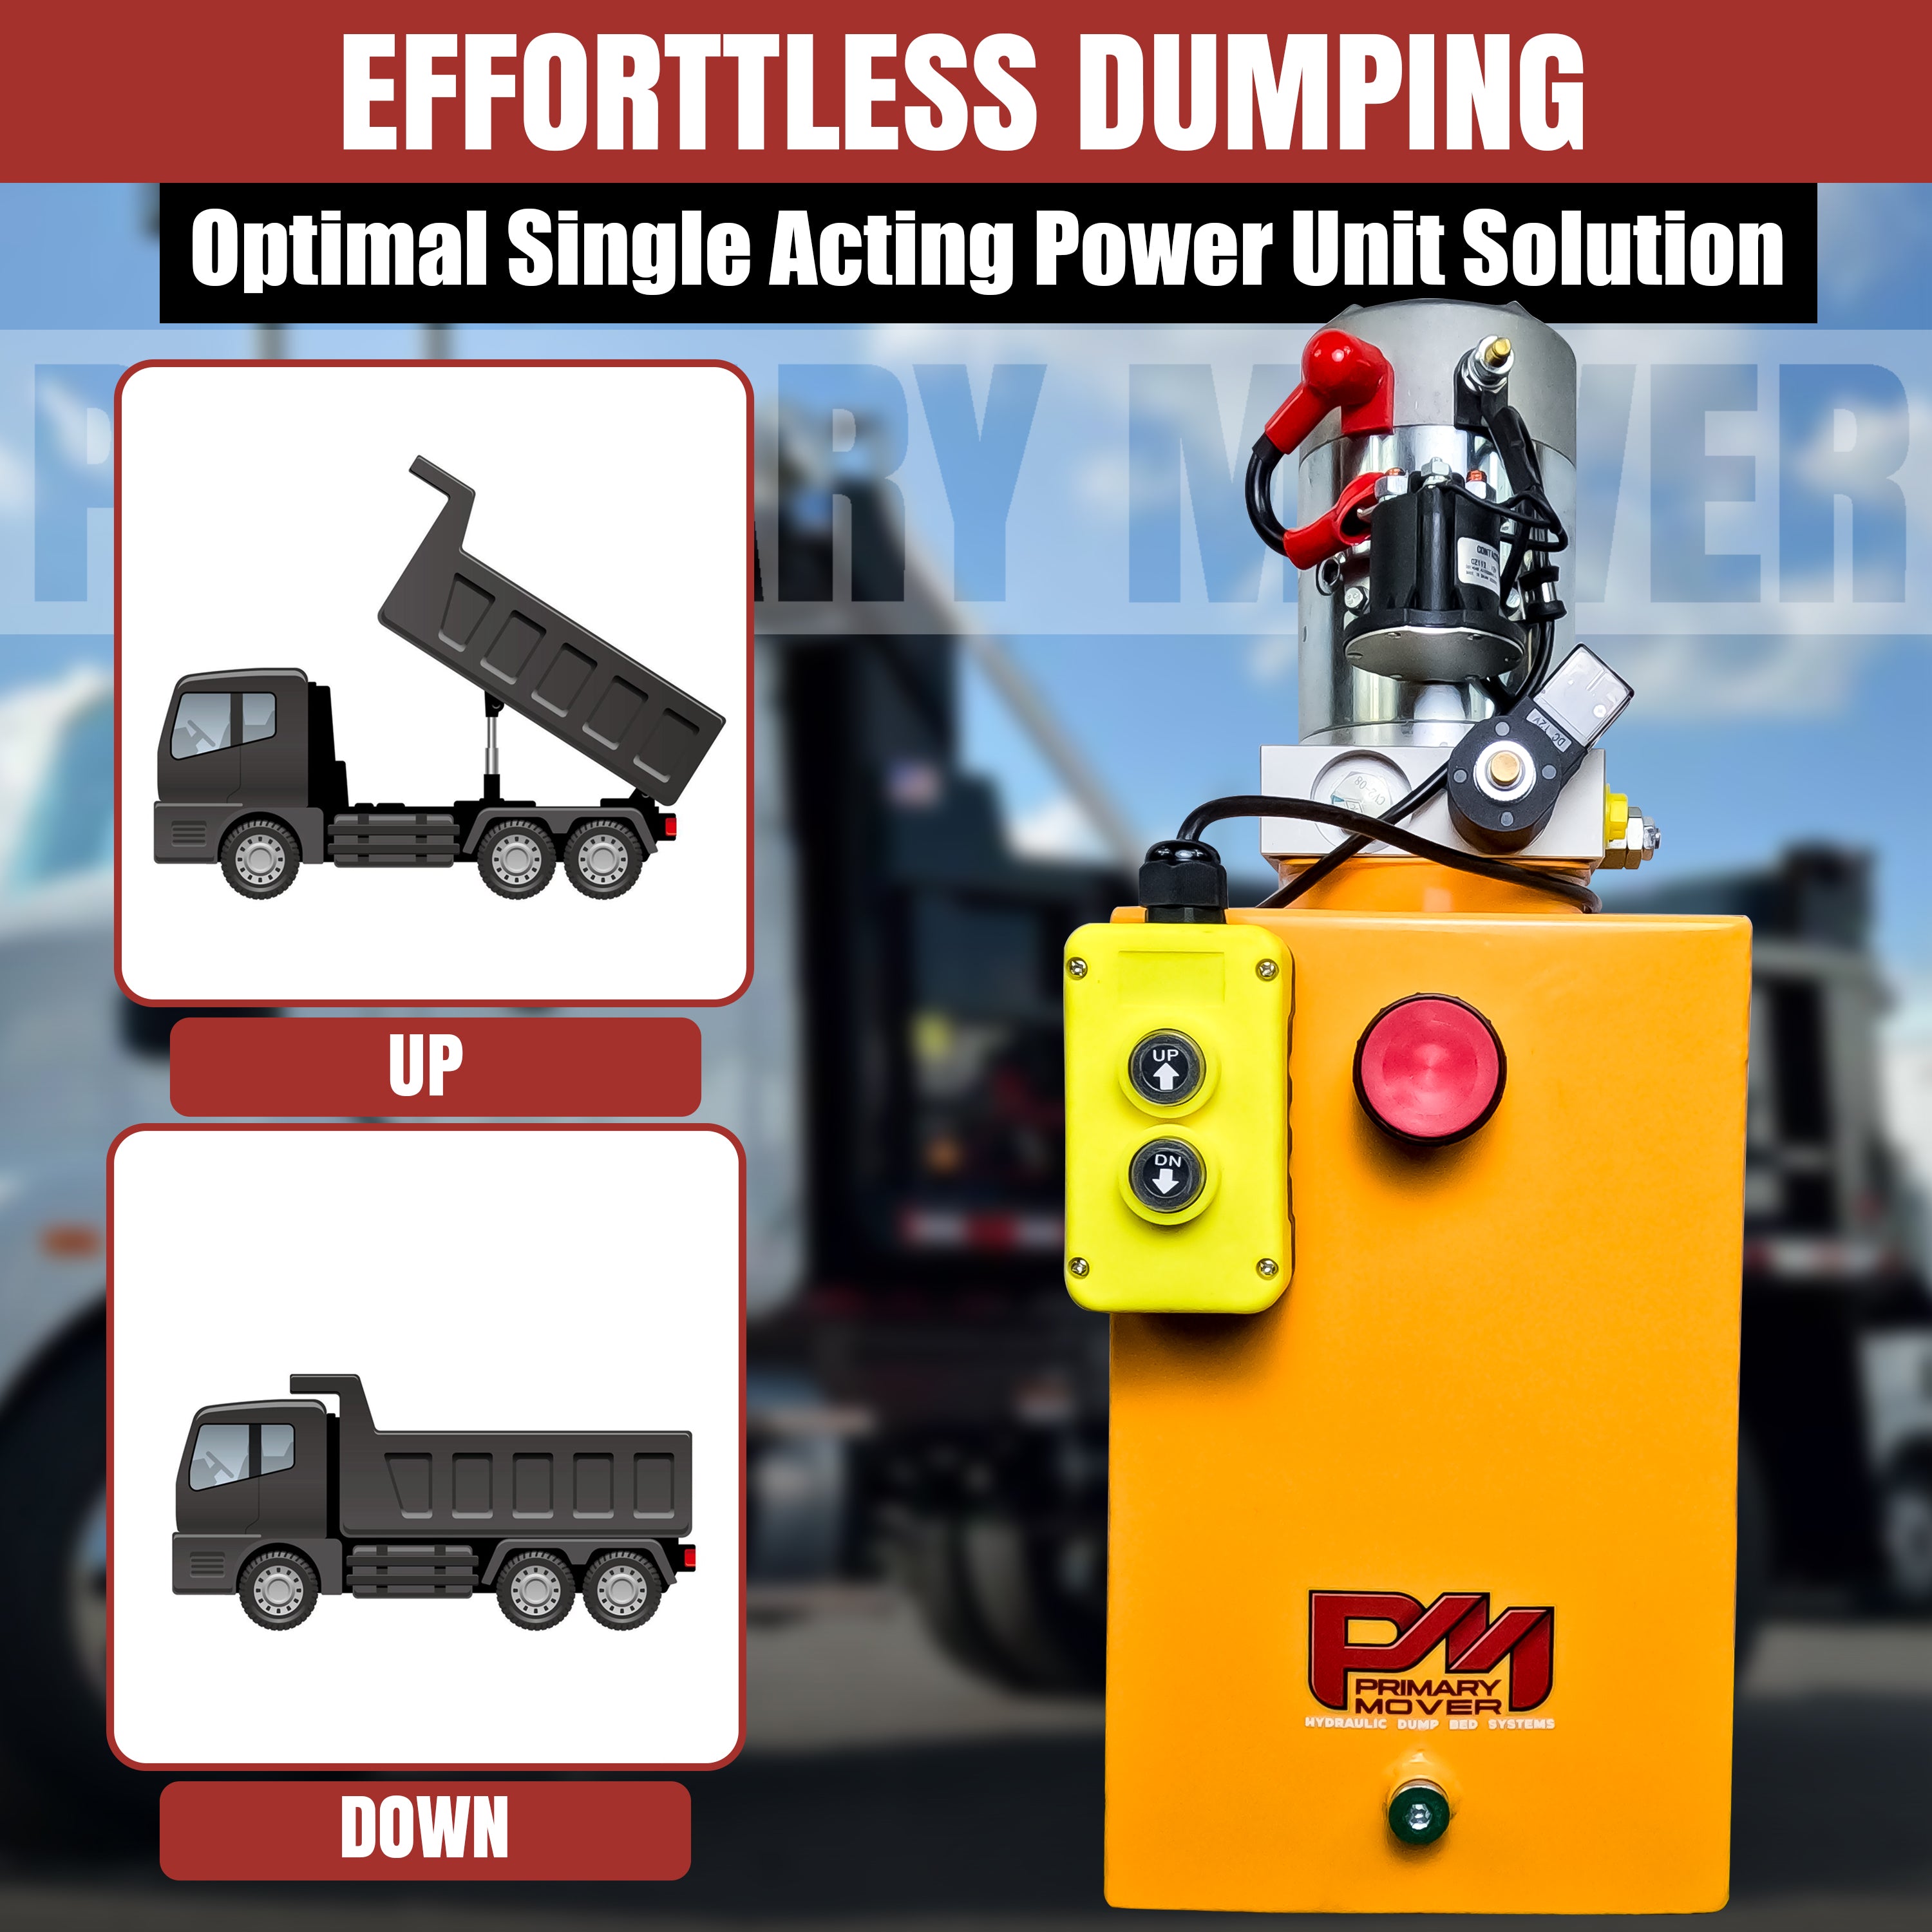 Primary Mover 12V Single-Acting Hydraulic Pump with Steel Reservoir, designed for efficient dump bed systems. Features single-acting pump, 3200 PSI max relief setting, 2.5 GPM flow, and 4-quart reservoir.